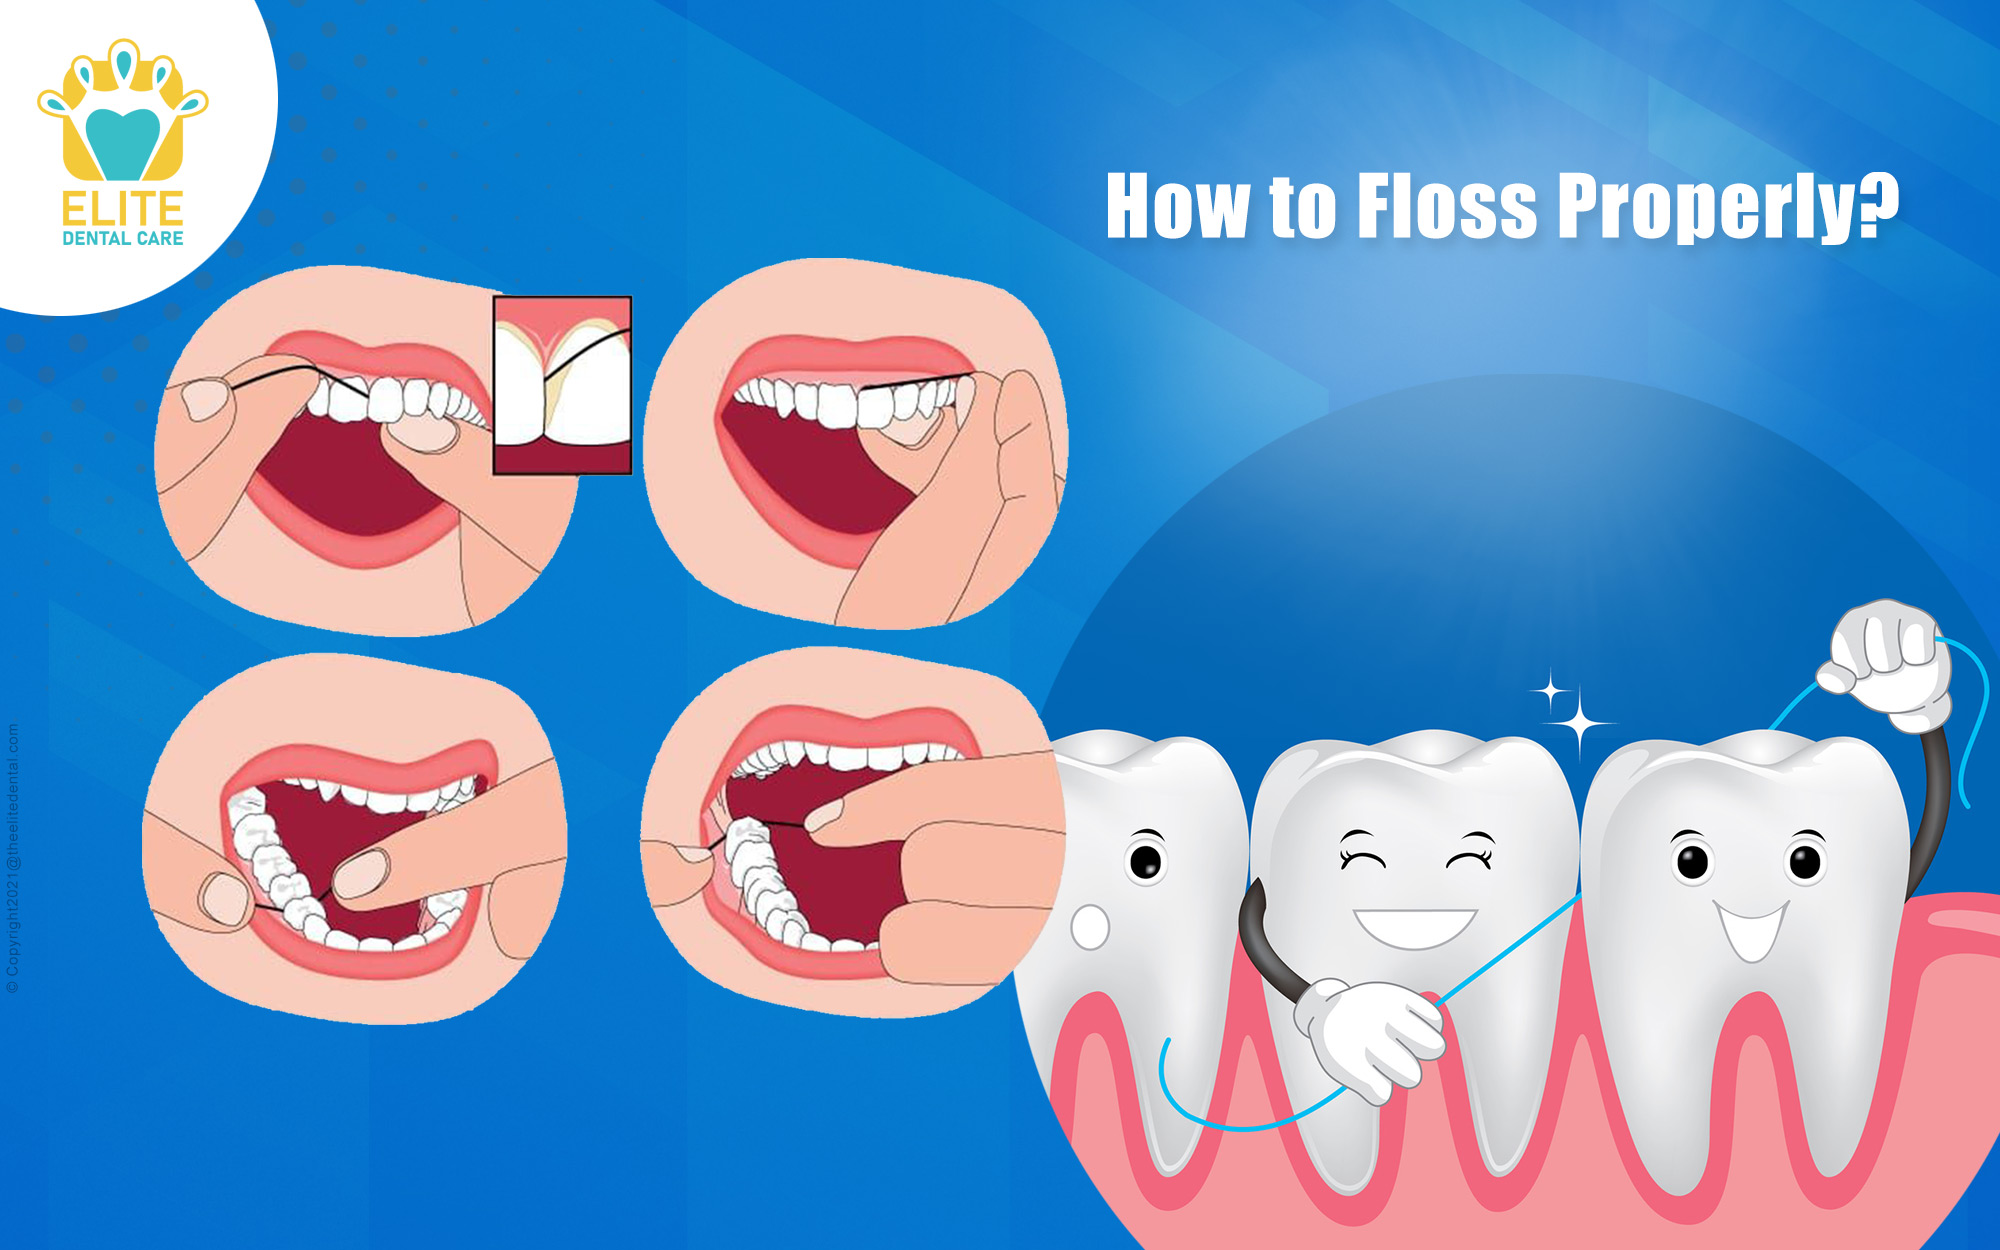 How to Floss Properly?